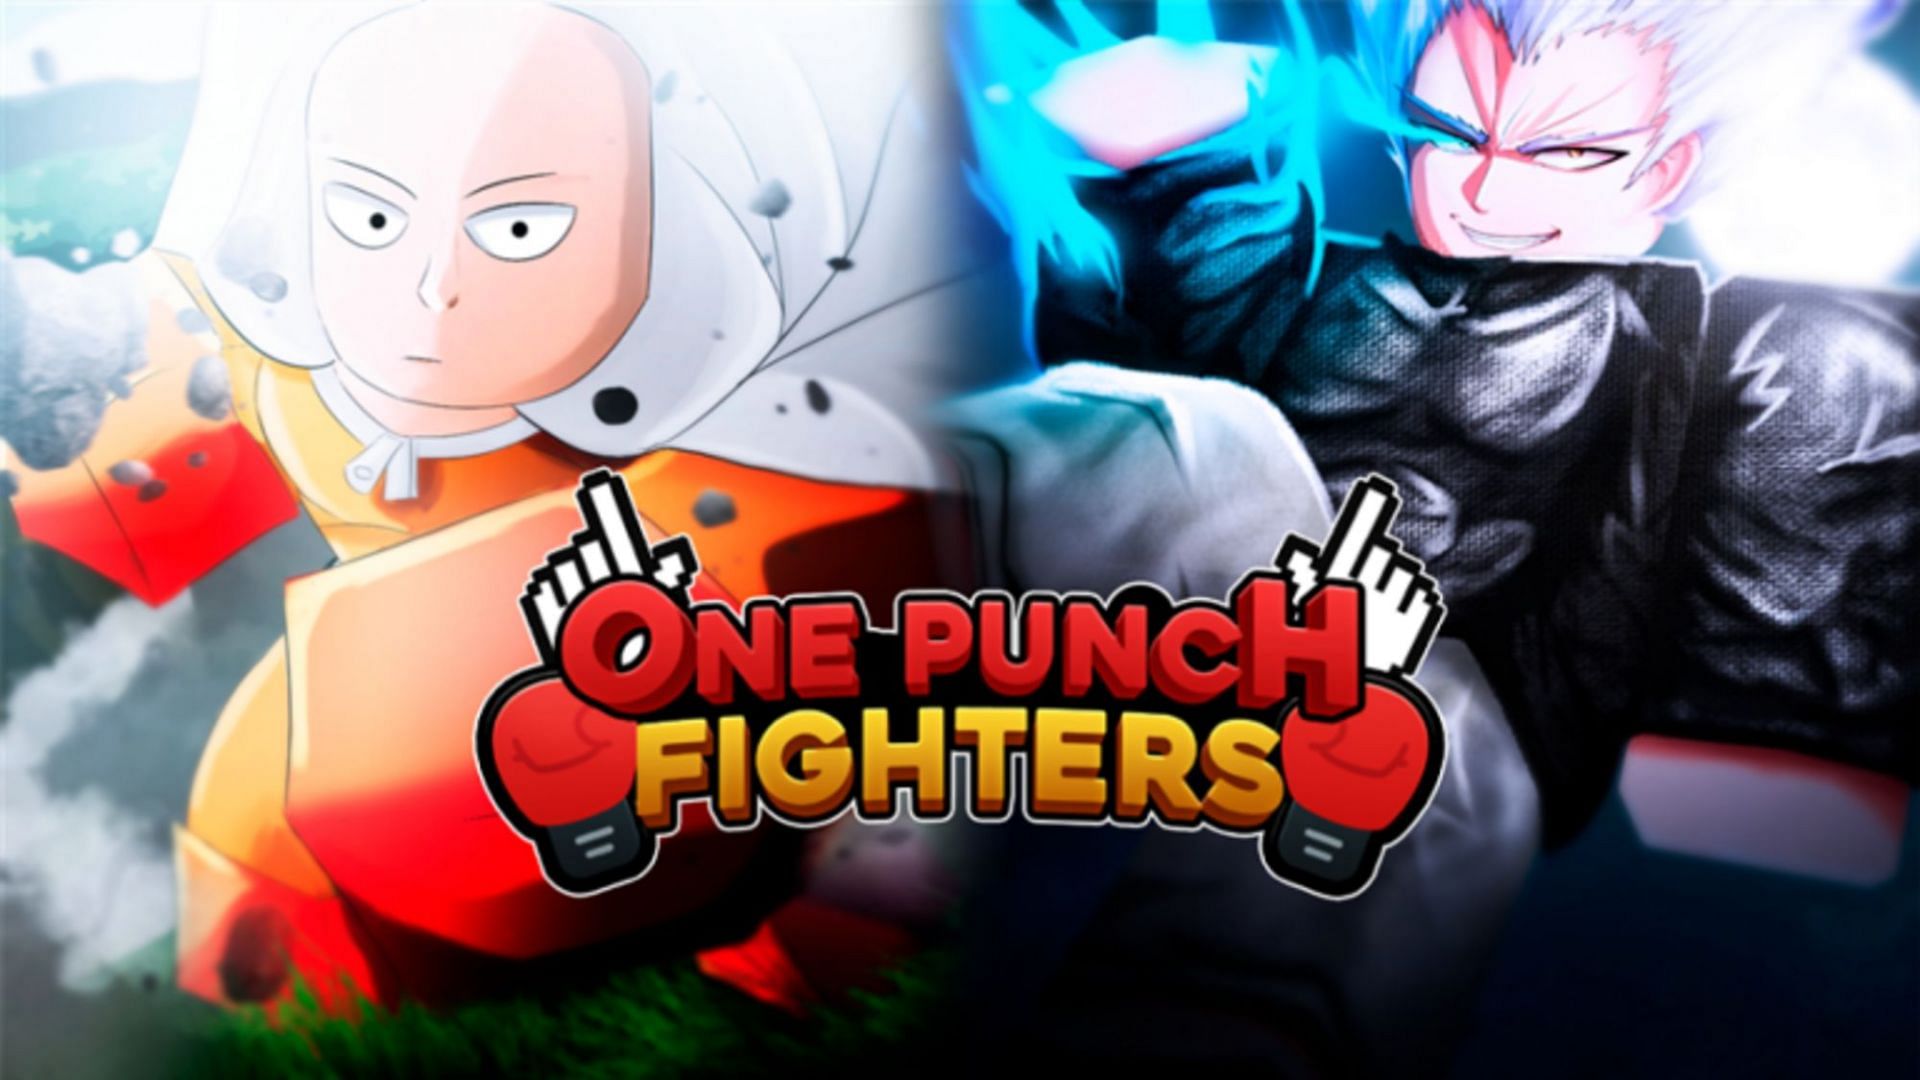 Fighter roblox. Пунч РОБЛОКС. Roblox Fighters. One Punch Fighters.